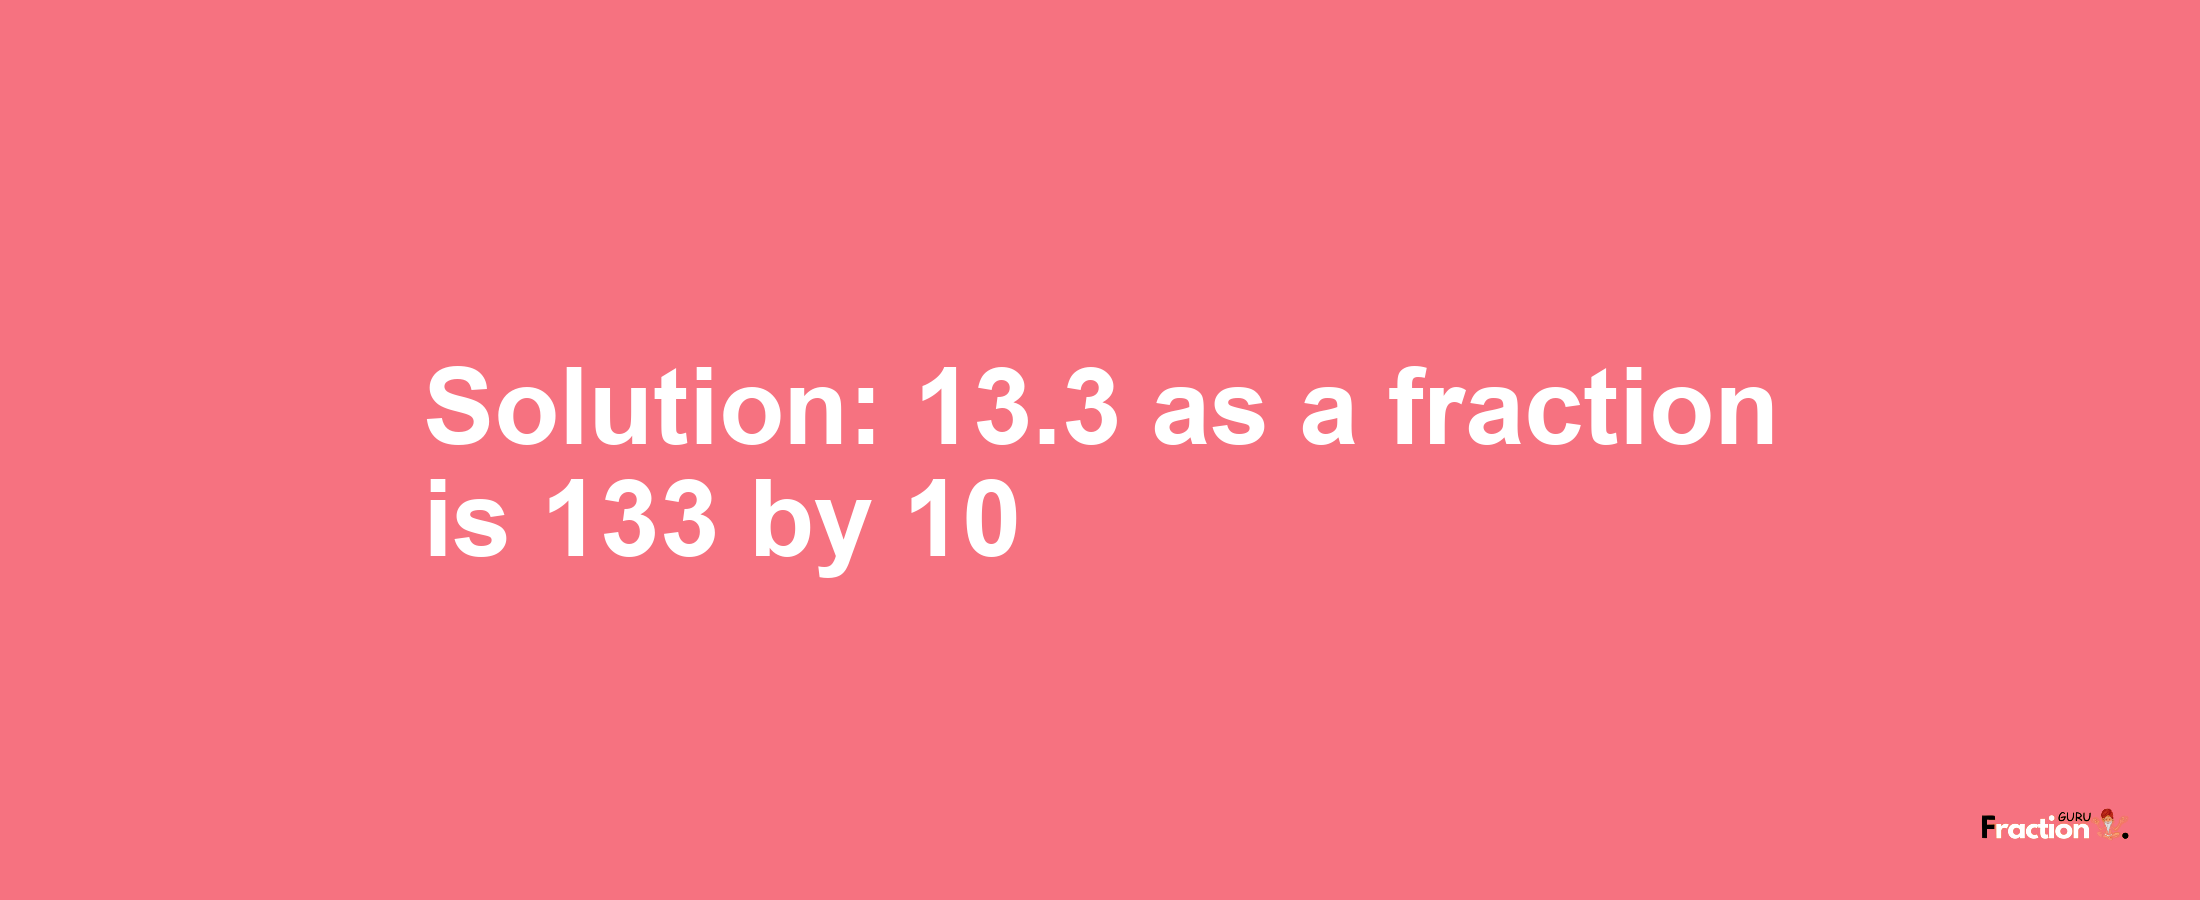 Solution:13.3 as a fraction is 133/10